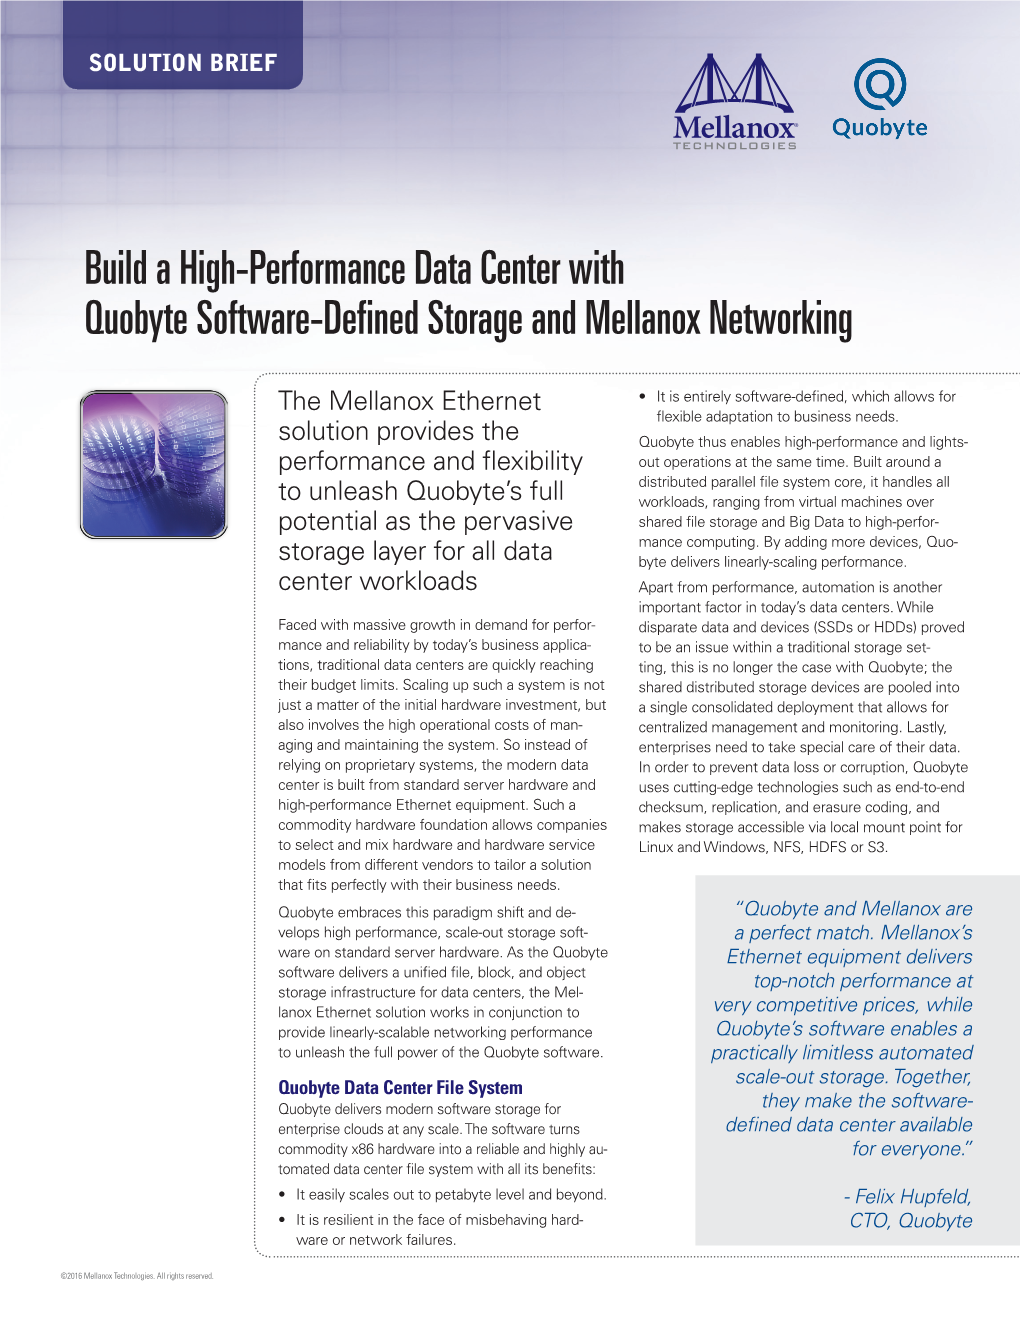 Build a High-Performance Data Center with Quobyte Software-Defined Storage and Mellanox Networking